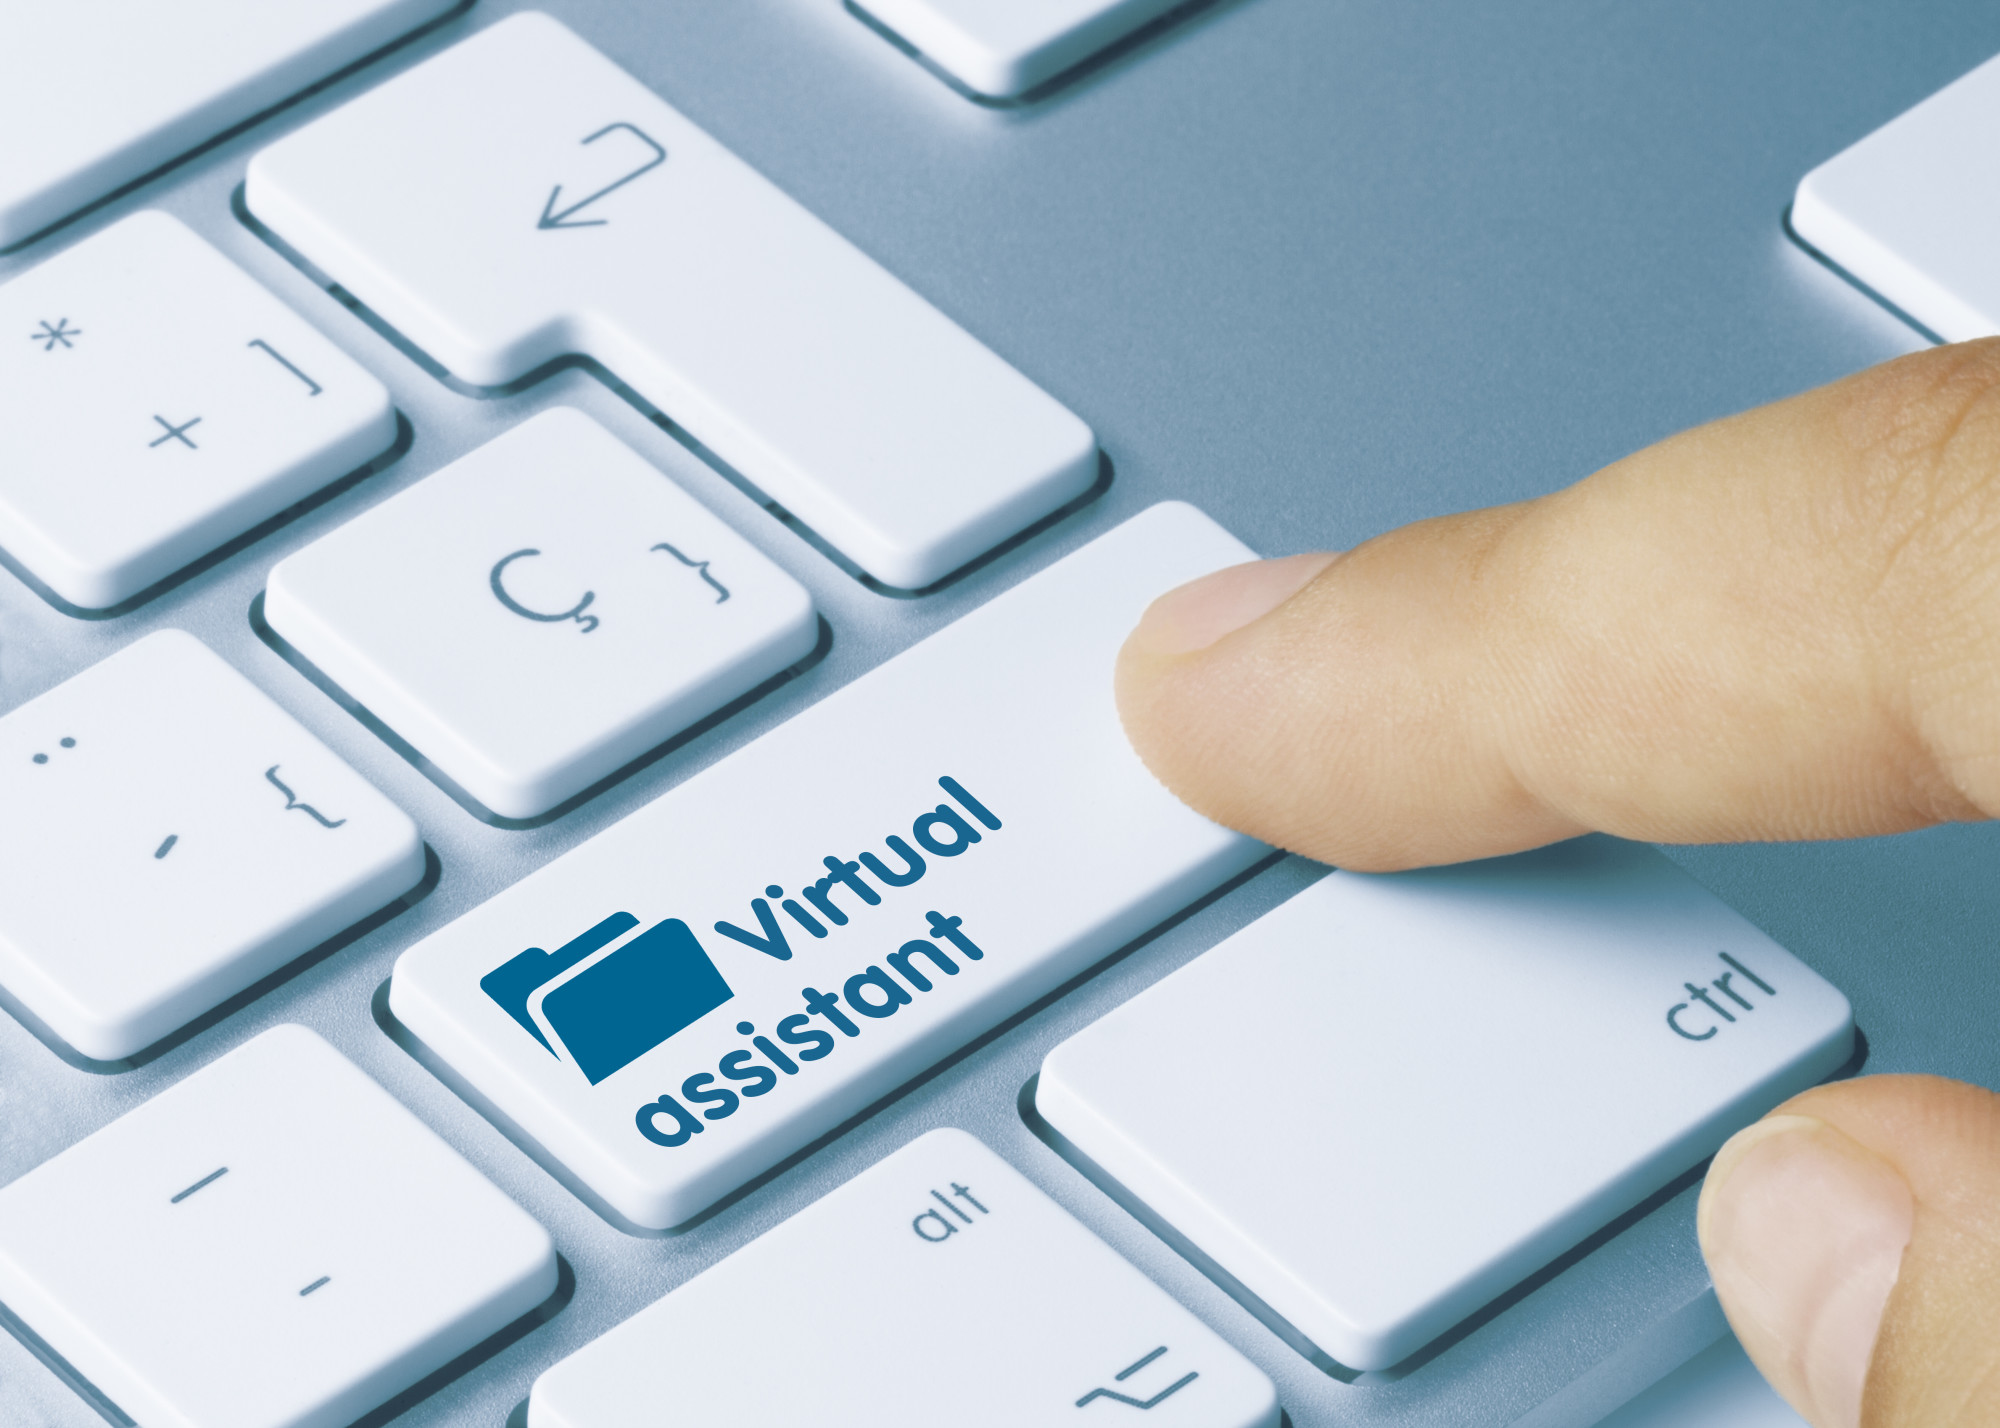 Image of keyboard with virtual assistant key